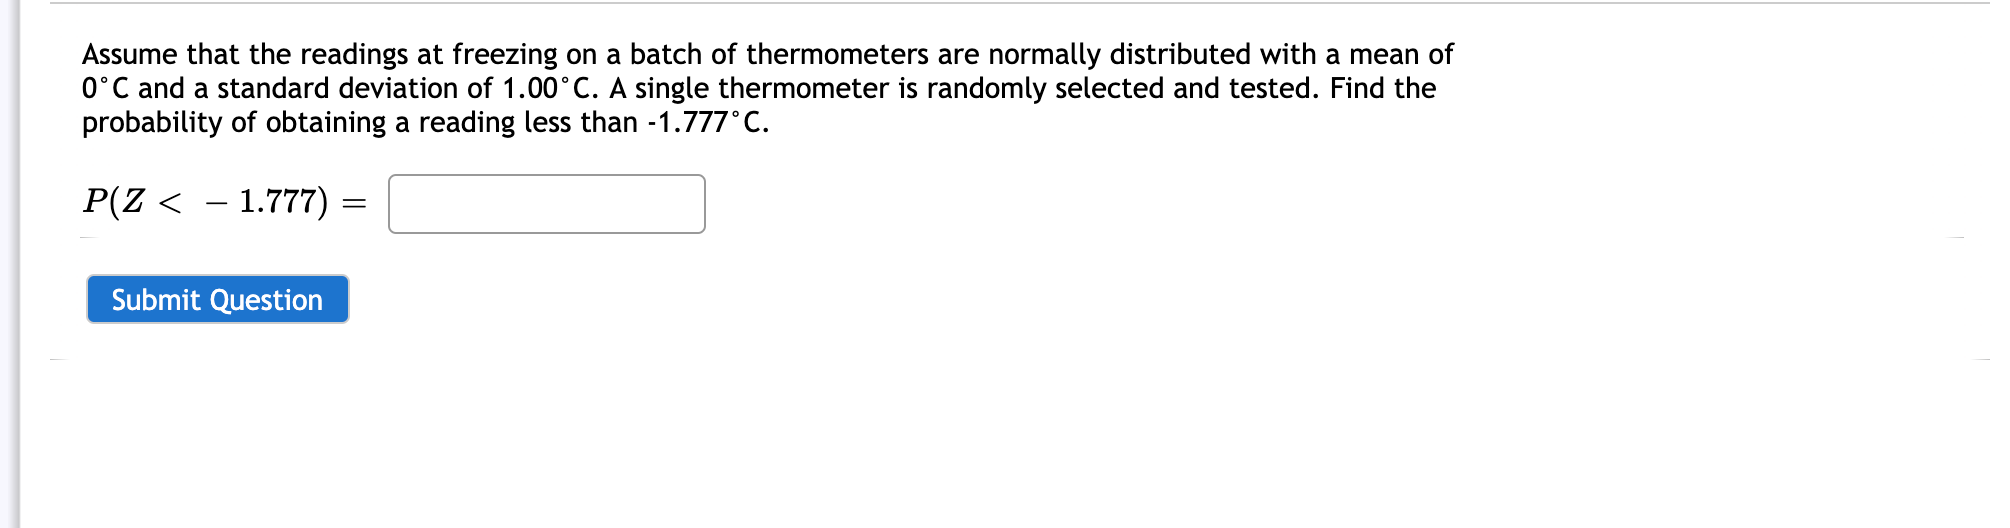 Assume that the readings at freezing on a batch of thermometers are normally distributed with a mean of
0°C and a standard deviation of 1.00°C. A single thermometer is randomly selected and tested. Find the
probability of obtaining a reading less than -1.777°C.
P(Z < – 1.777) :
